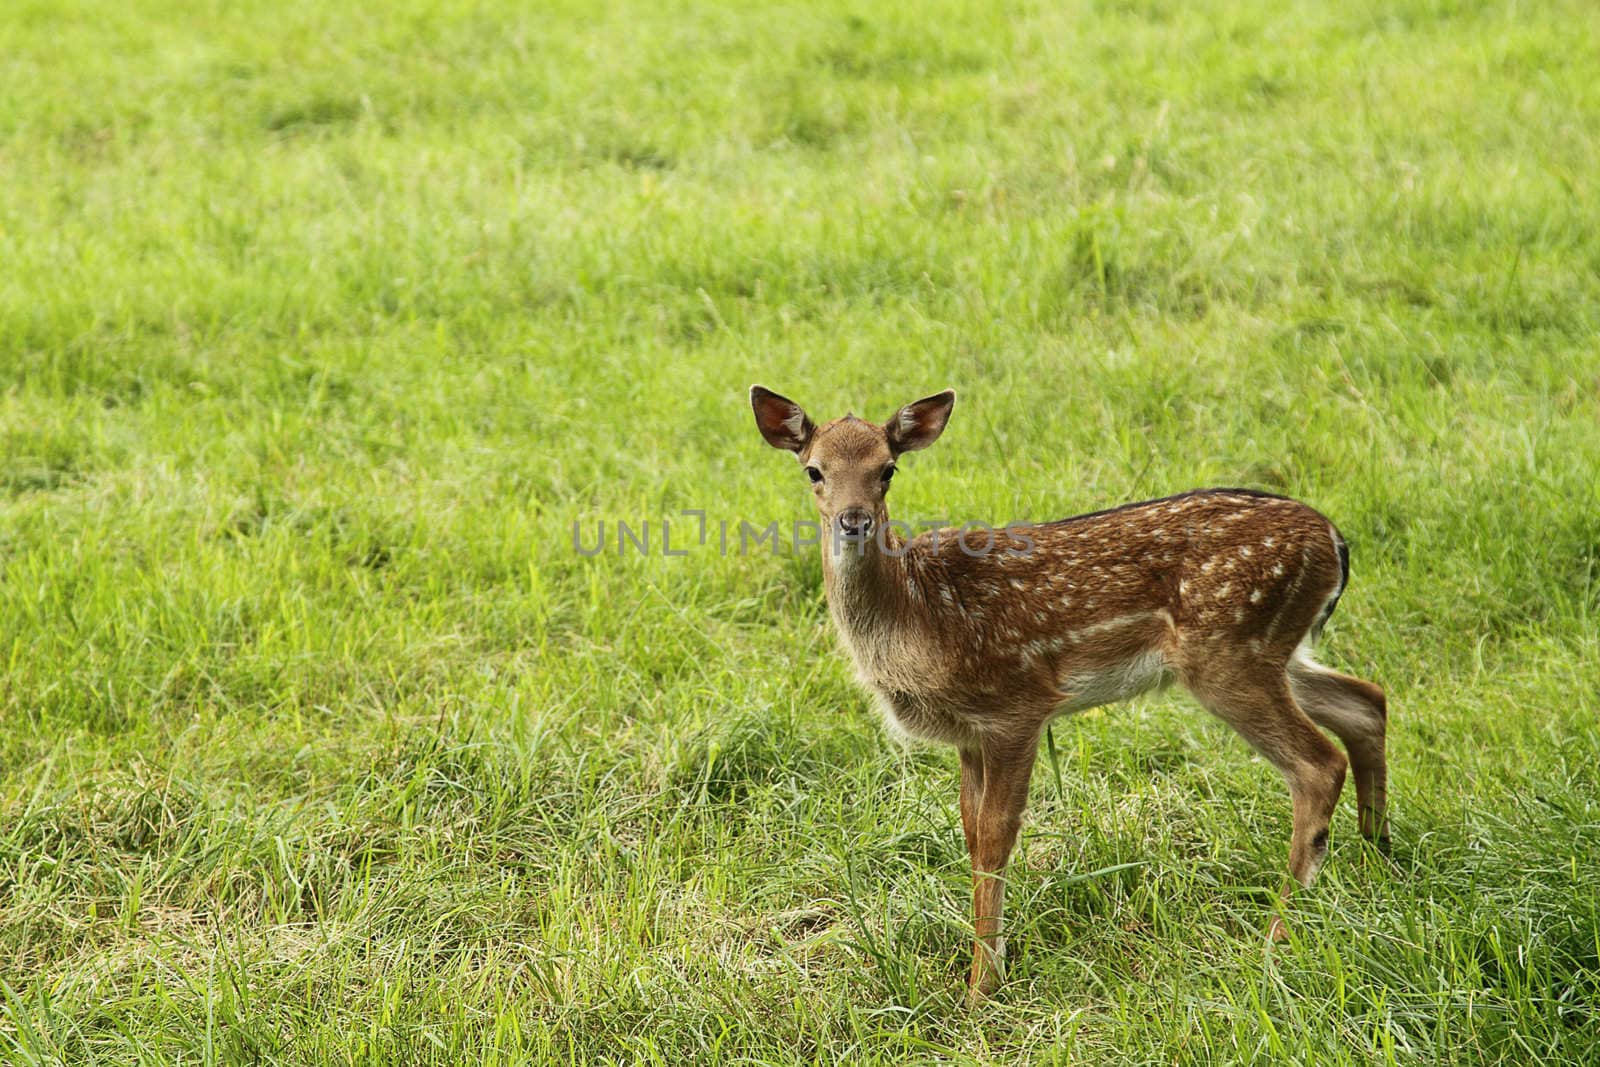 Small doe in zoo over green grass